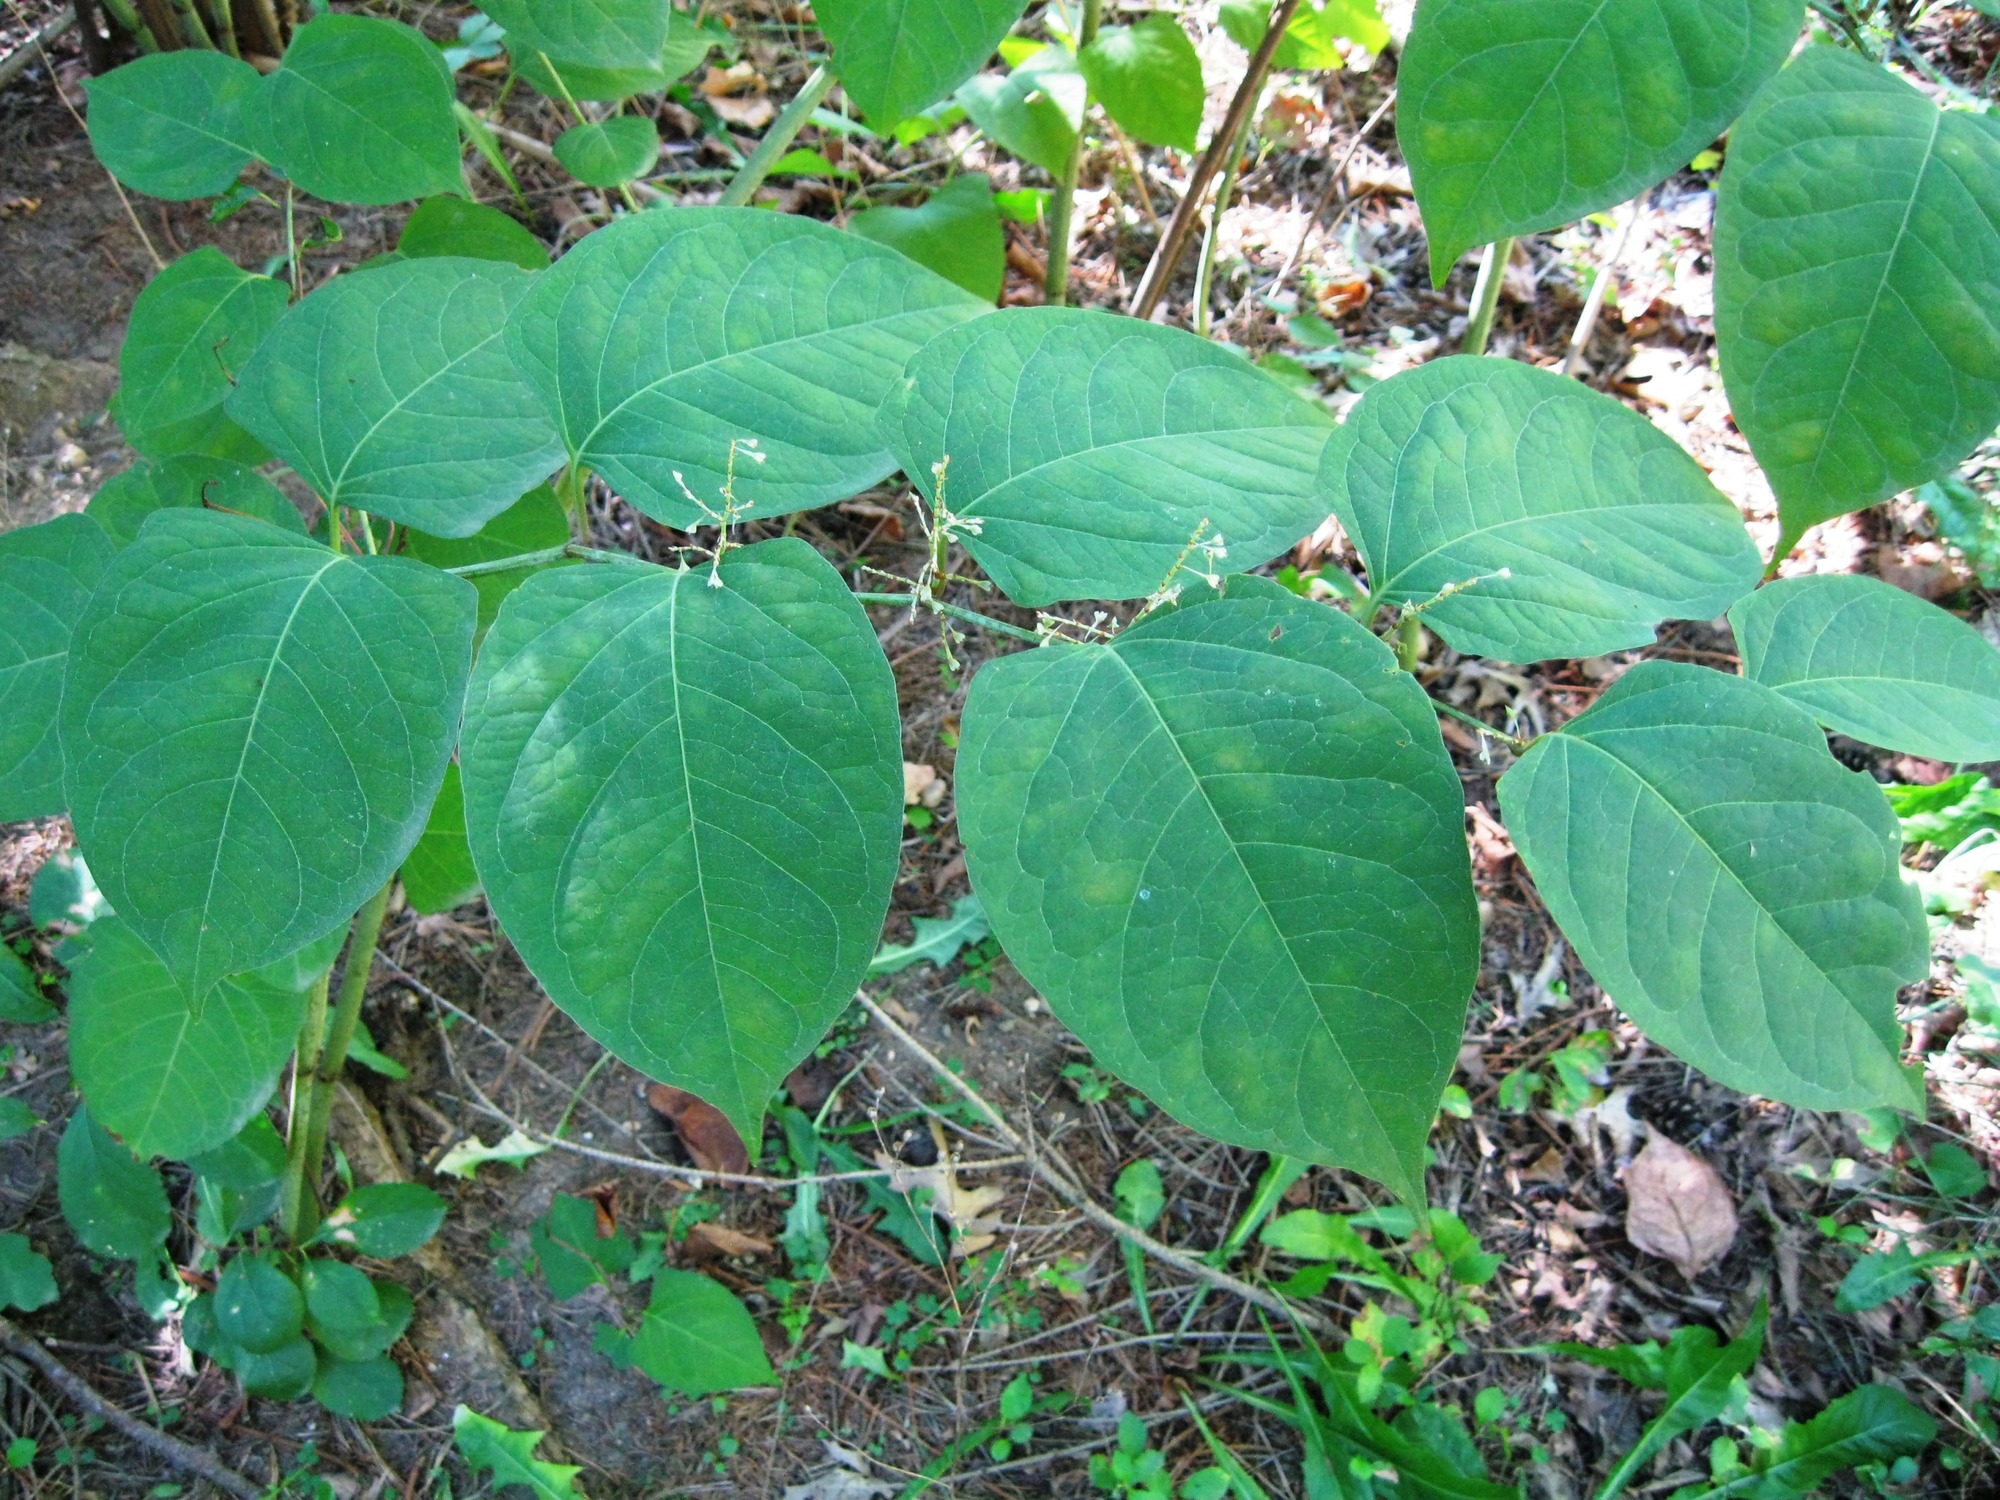 Large, green leaves of the Japanese knotweed plant are shown. This invasive shrub is prohibited in several states, including Michigan.